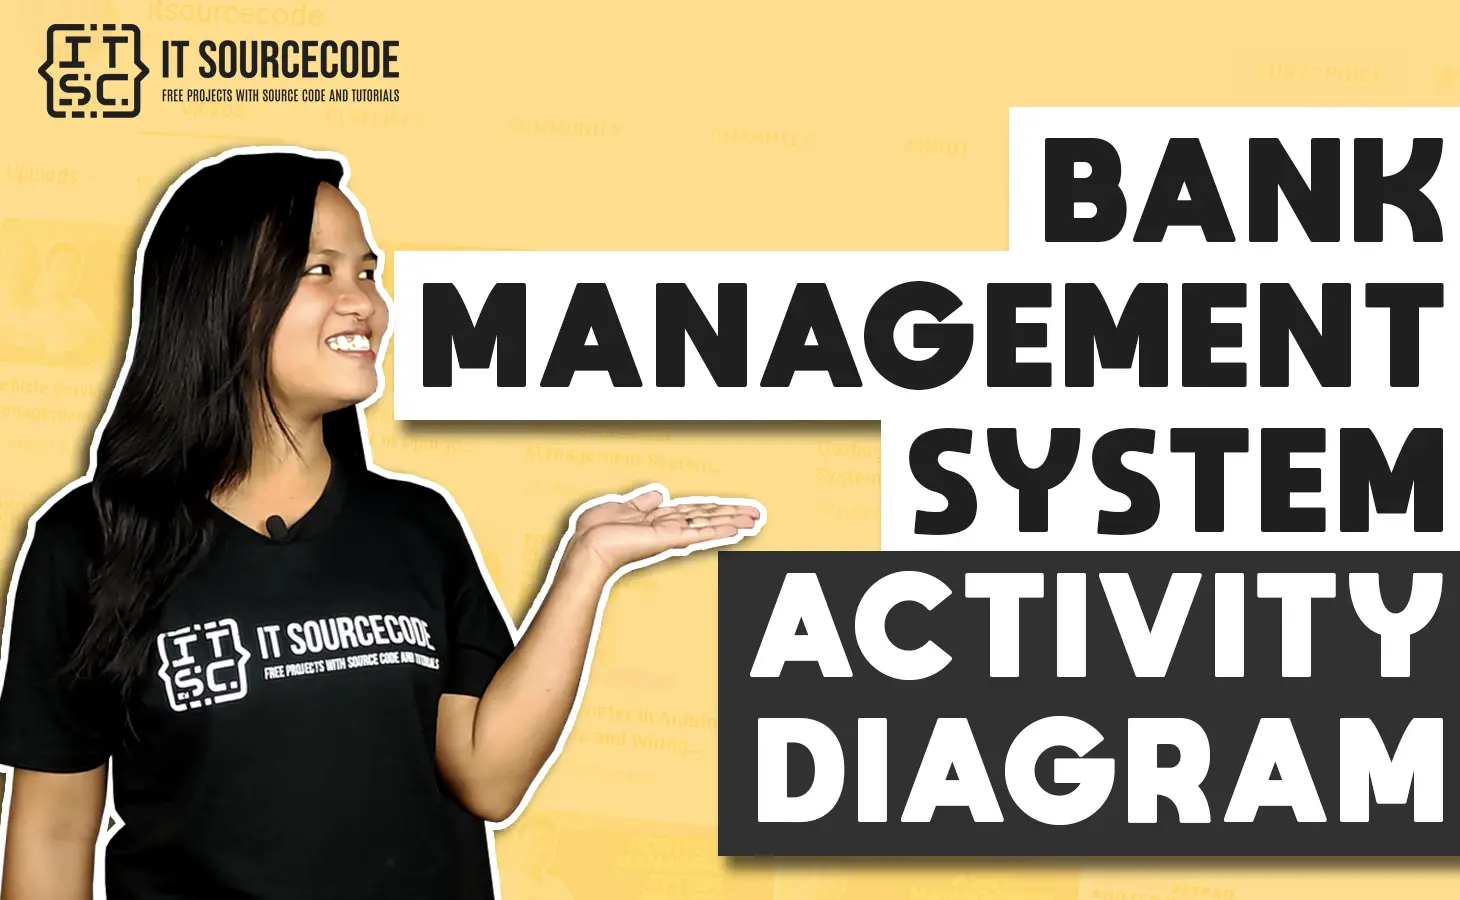 Activity Diagram of Bank Management System